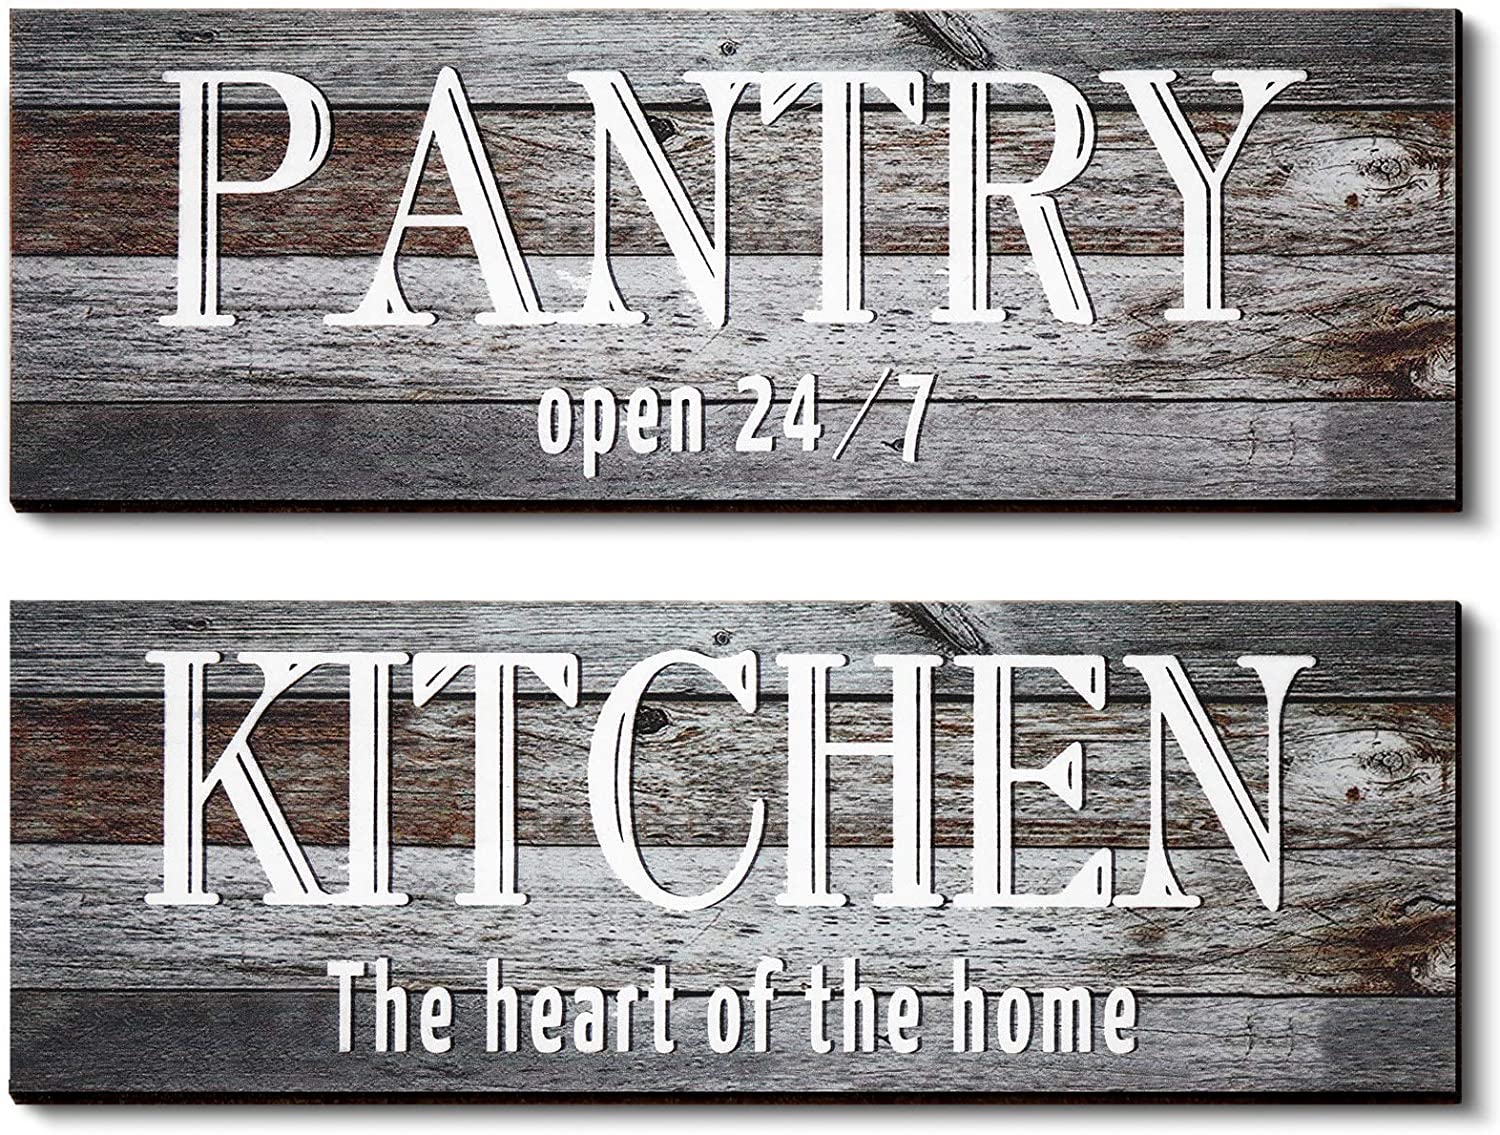 2 Pieces Pantry Rustic Wood Wall Sign Kitchen Wall Signs Decor Kitchen the Heart of the Home Wooden Wall Decoration Farmhouse Hanging Wooden Signs for Home Wall Decor, 4.7 x 13.8 Inch (Gray)